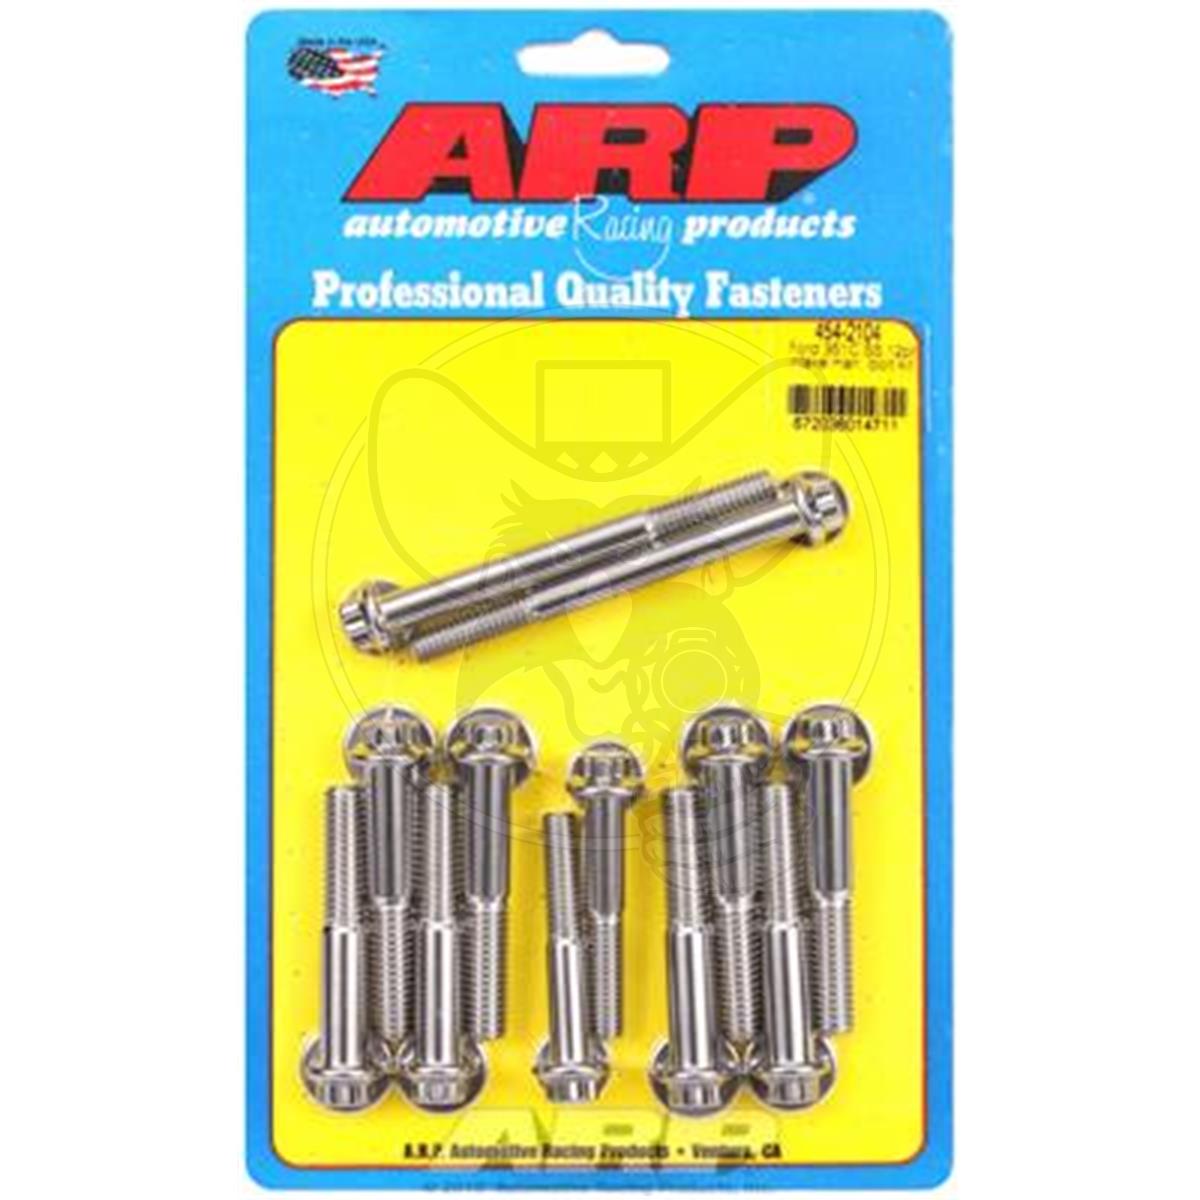 ARP INTAKE MANIFOLD BOLTS FITS FORD CLEVELAND 302-351 S/STEEL 12PT